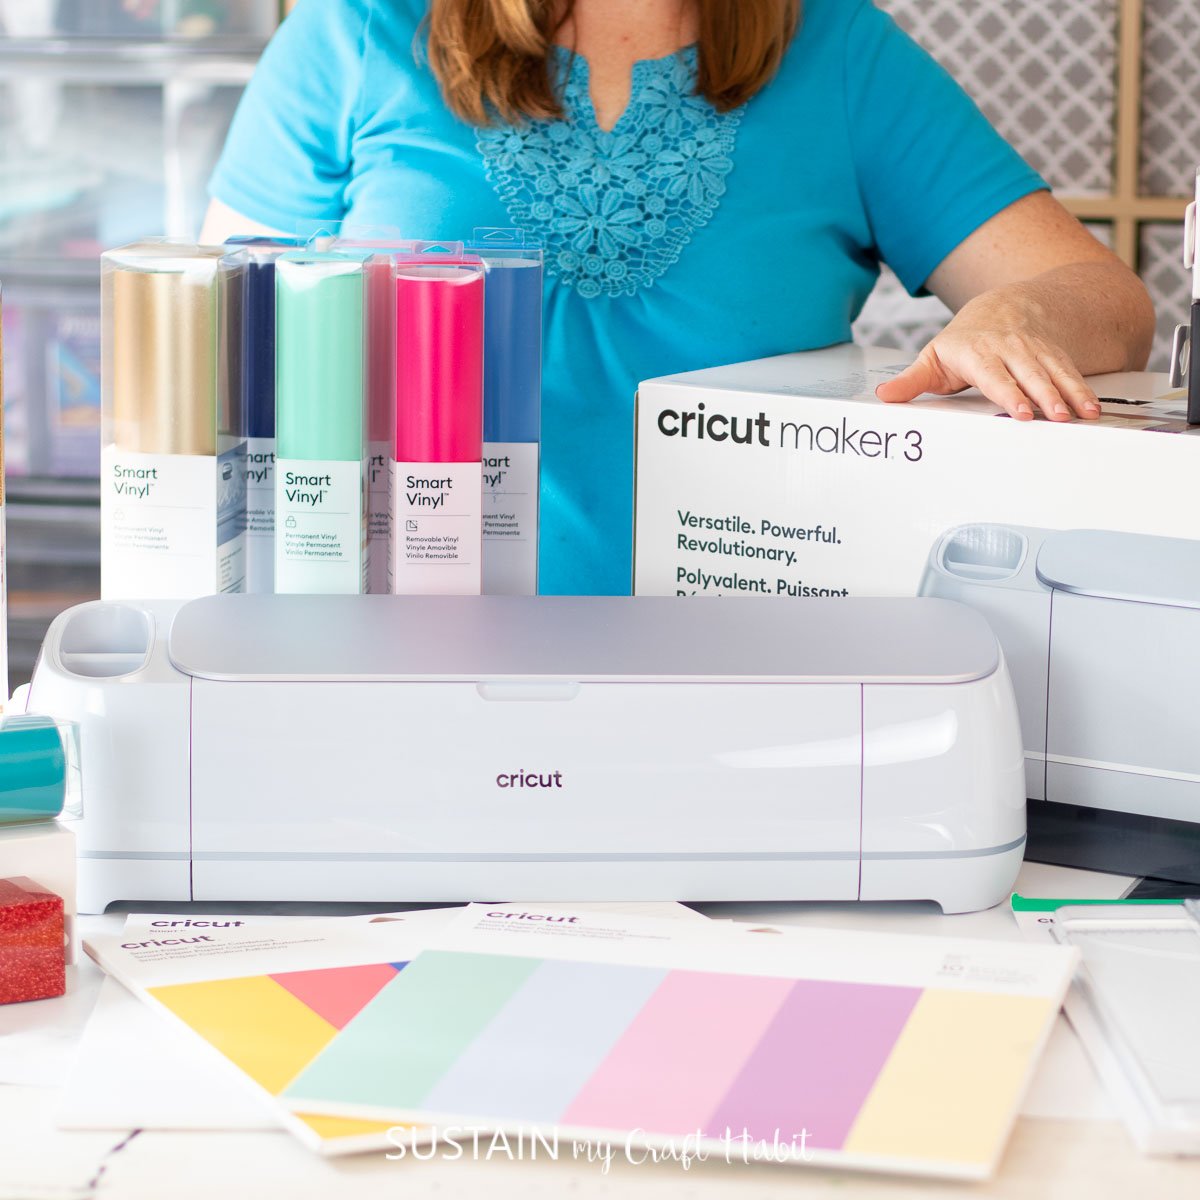 Getting Started with Cricut Maker 3